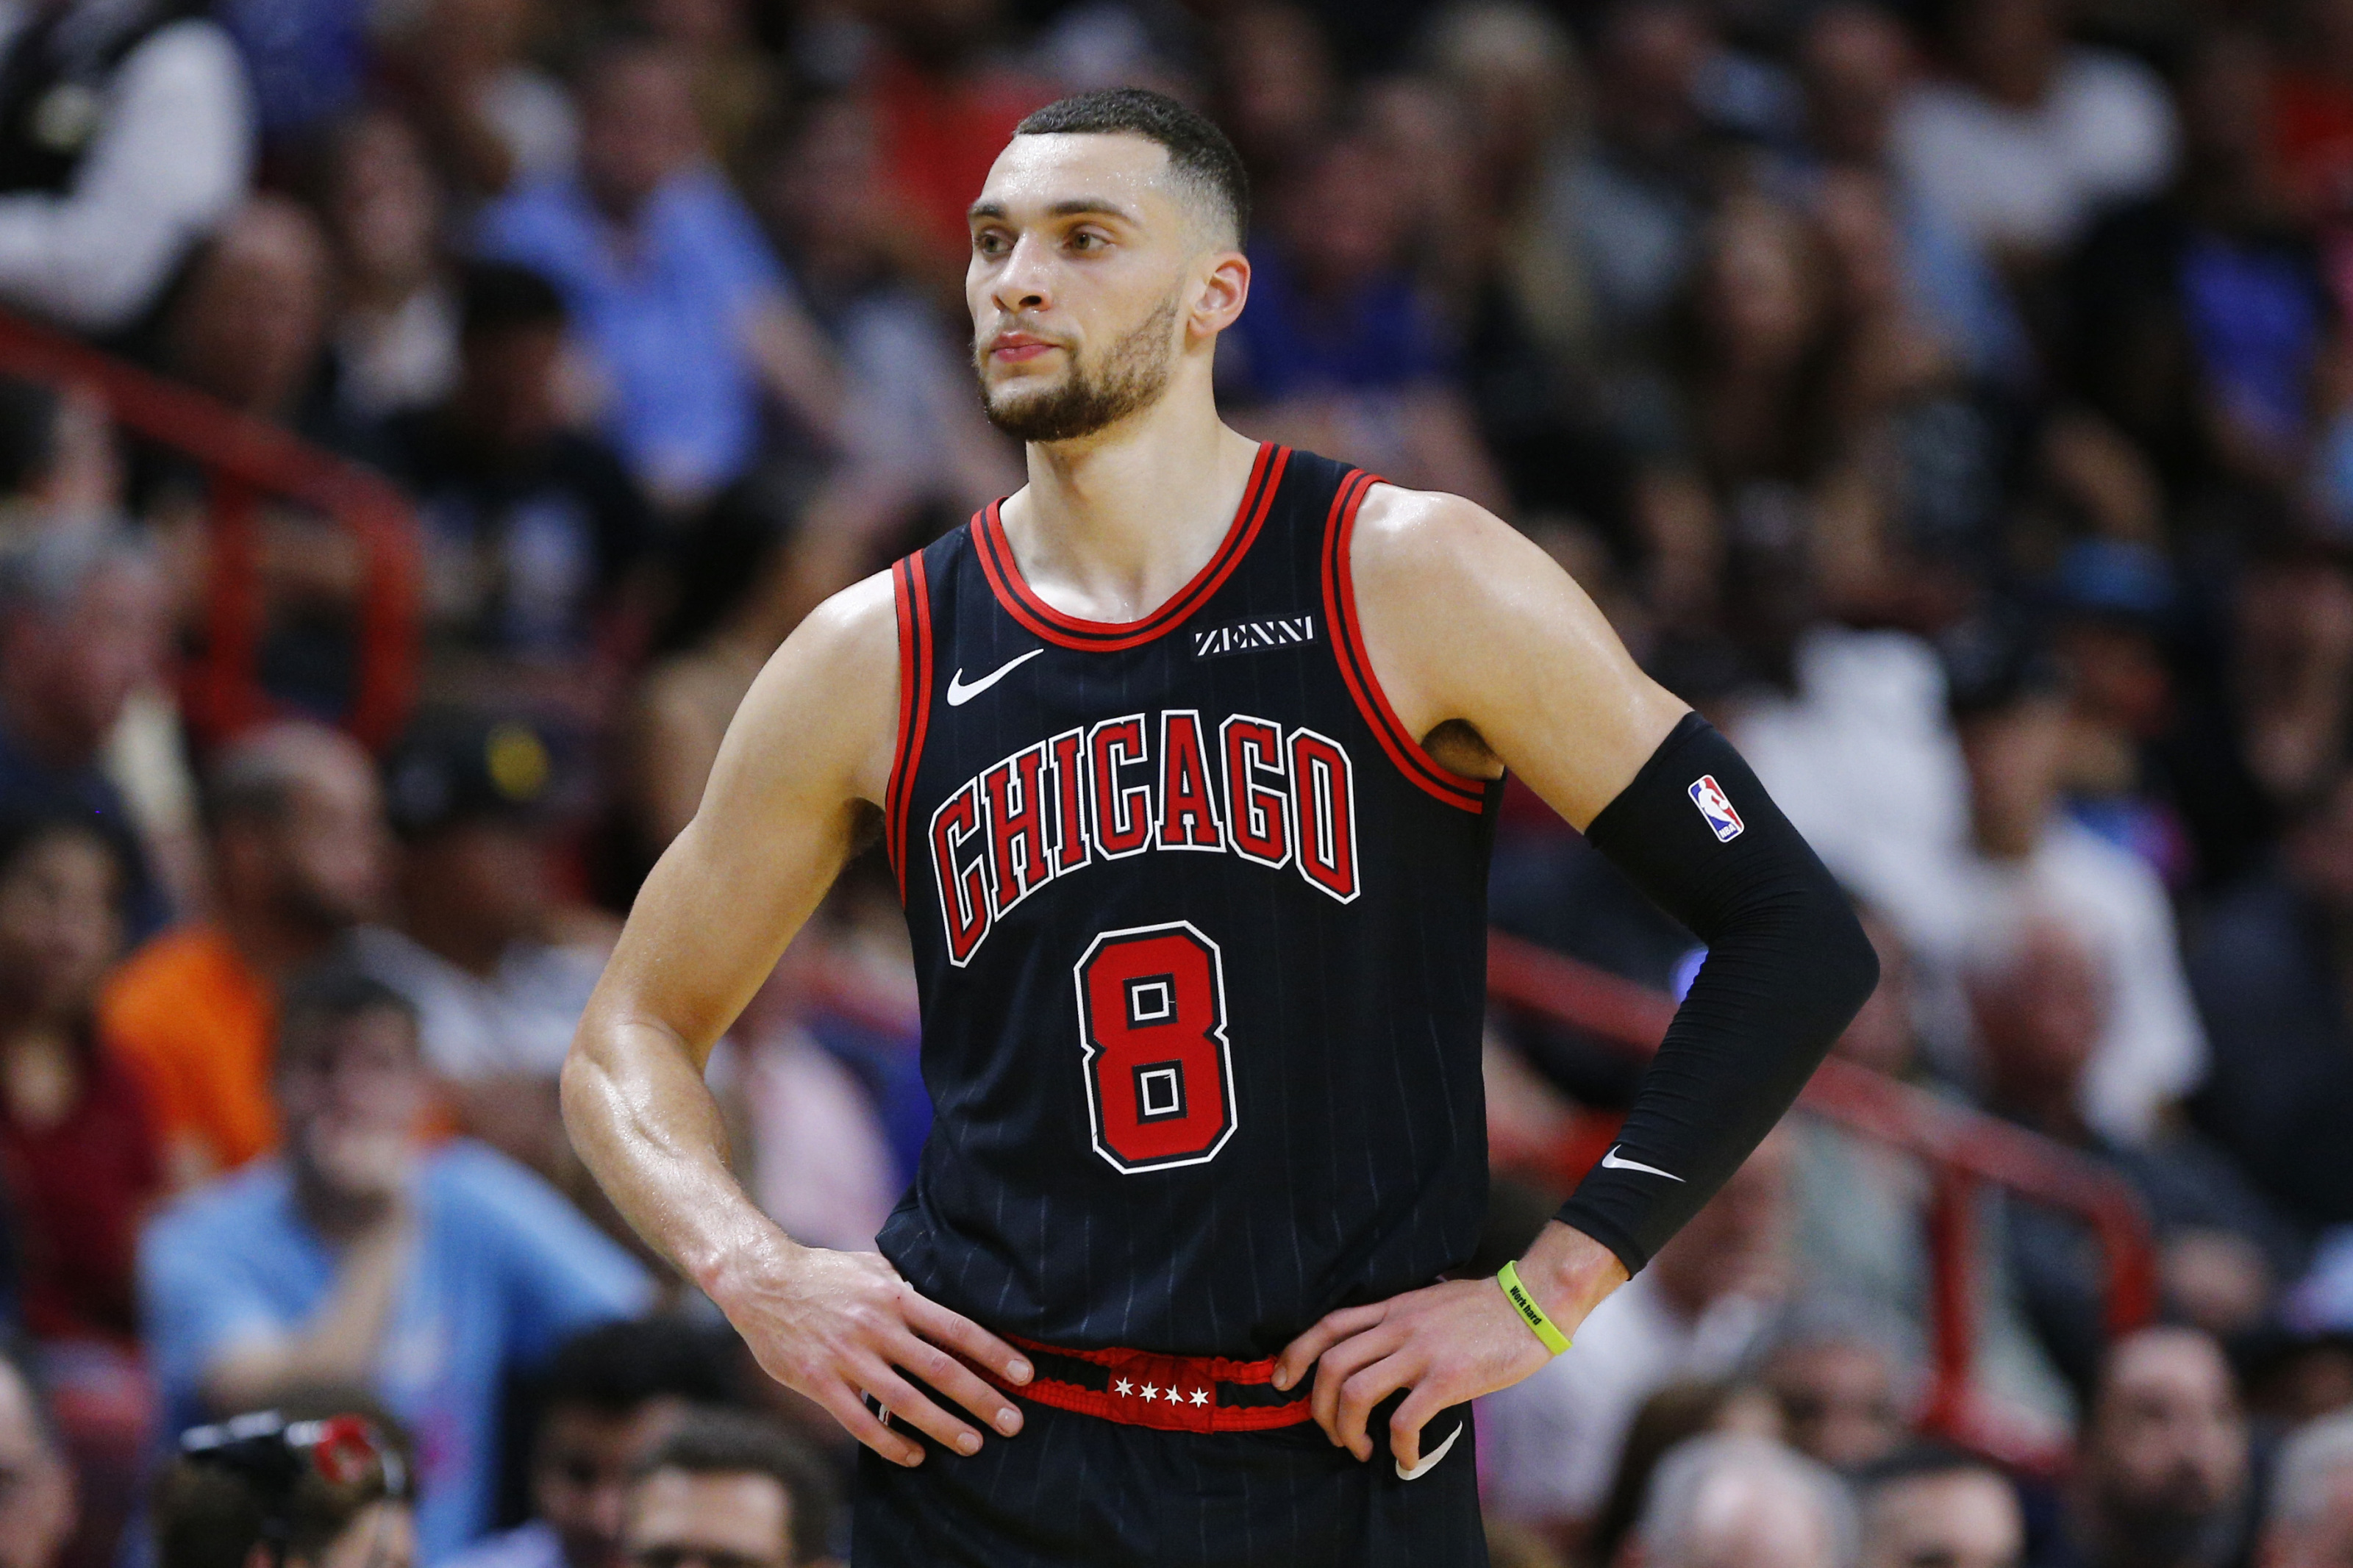 Kronisk Afvist Rige Chicago Bulls: Is Zach LaVine on pace to make his first All-Star team?